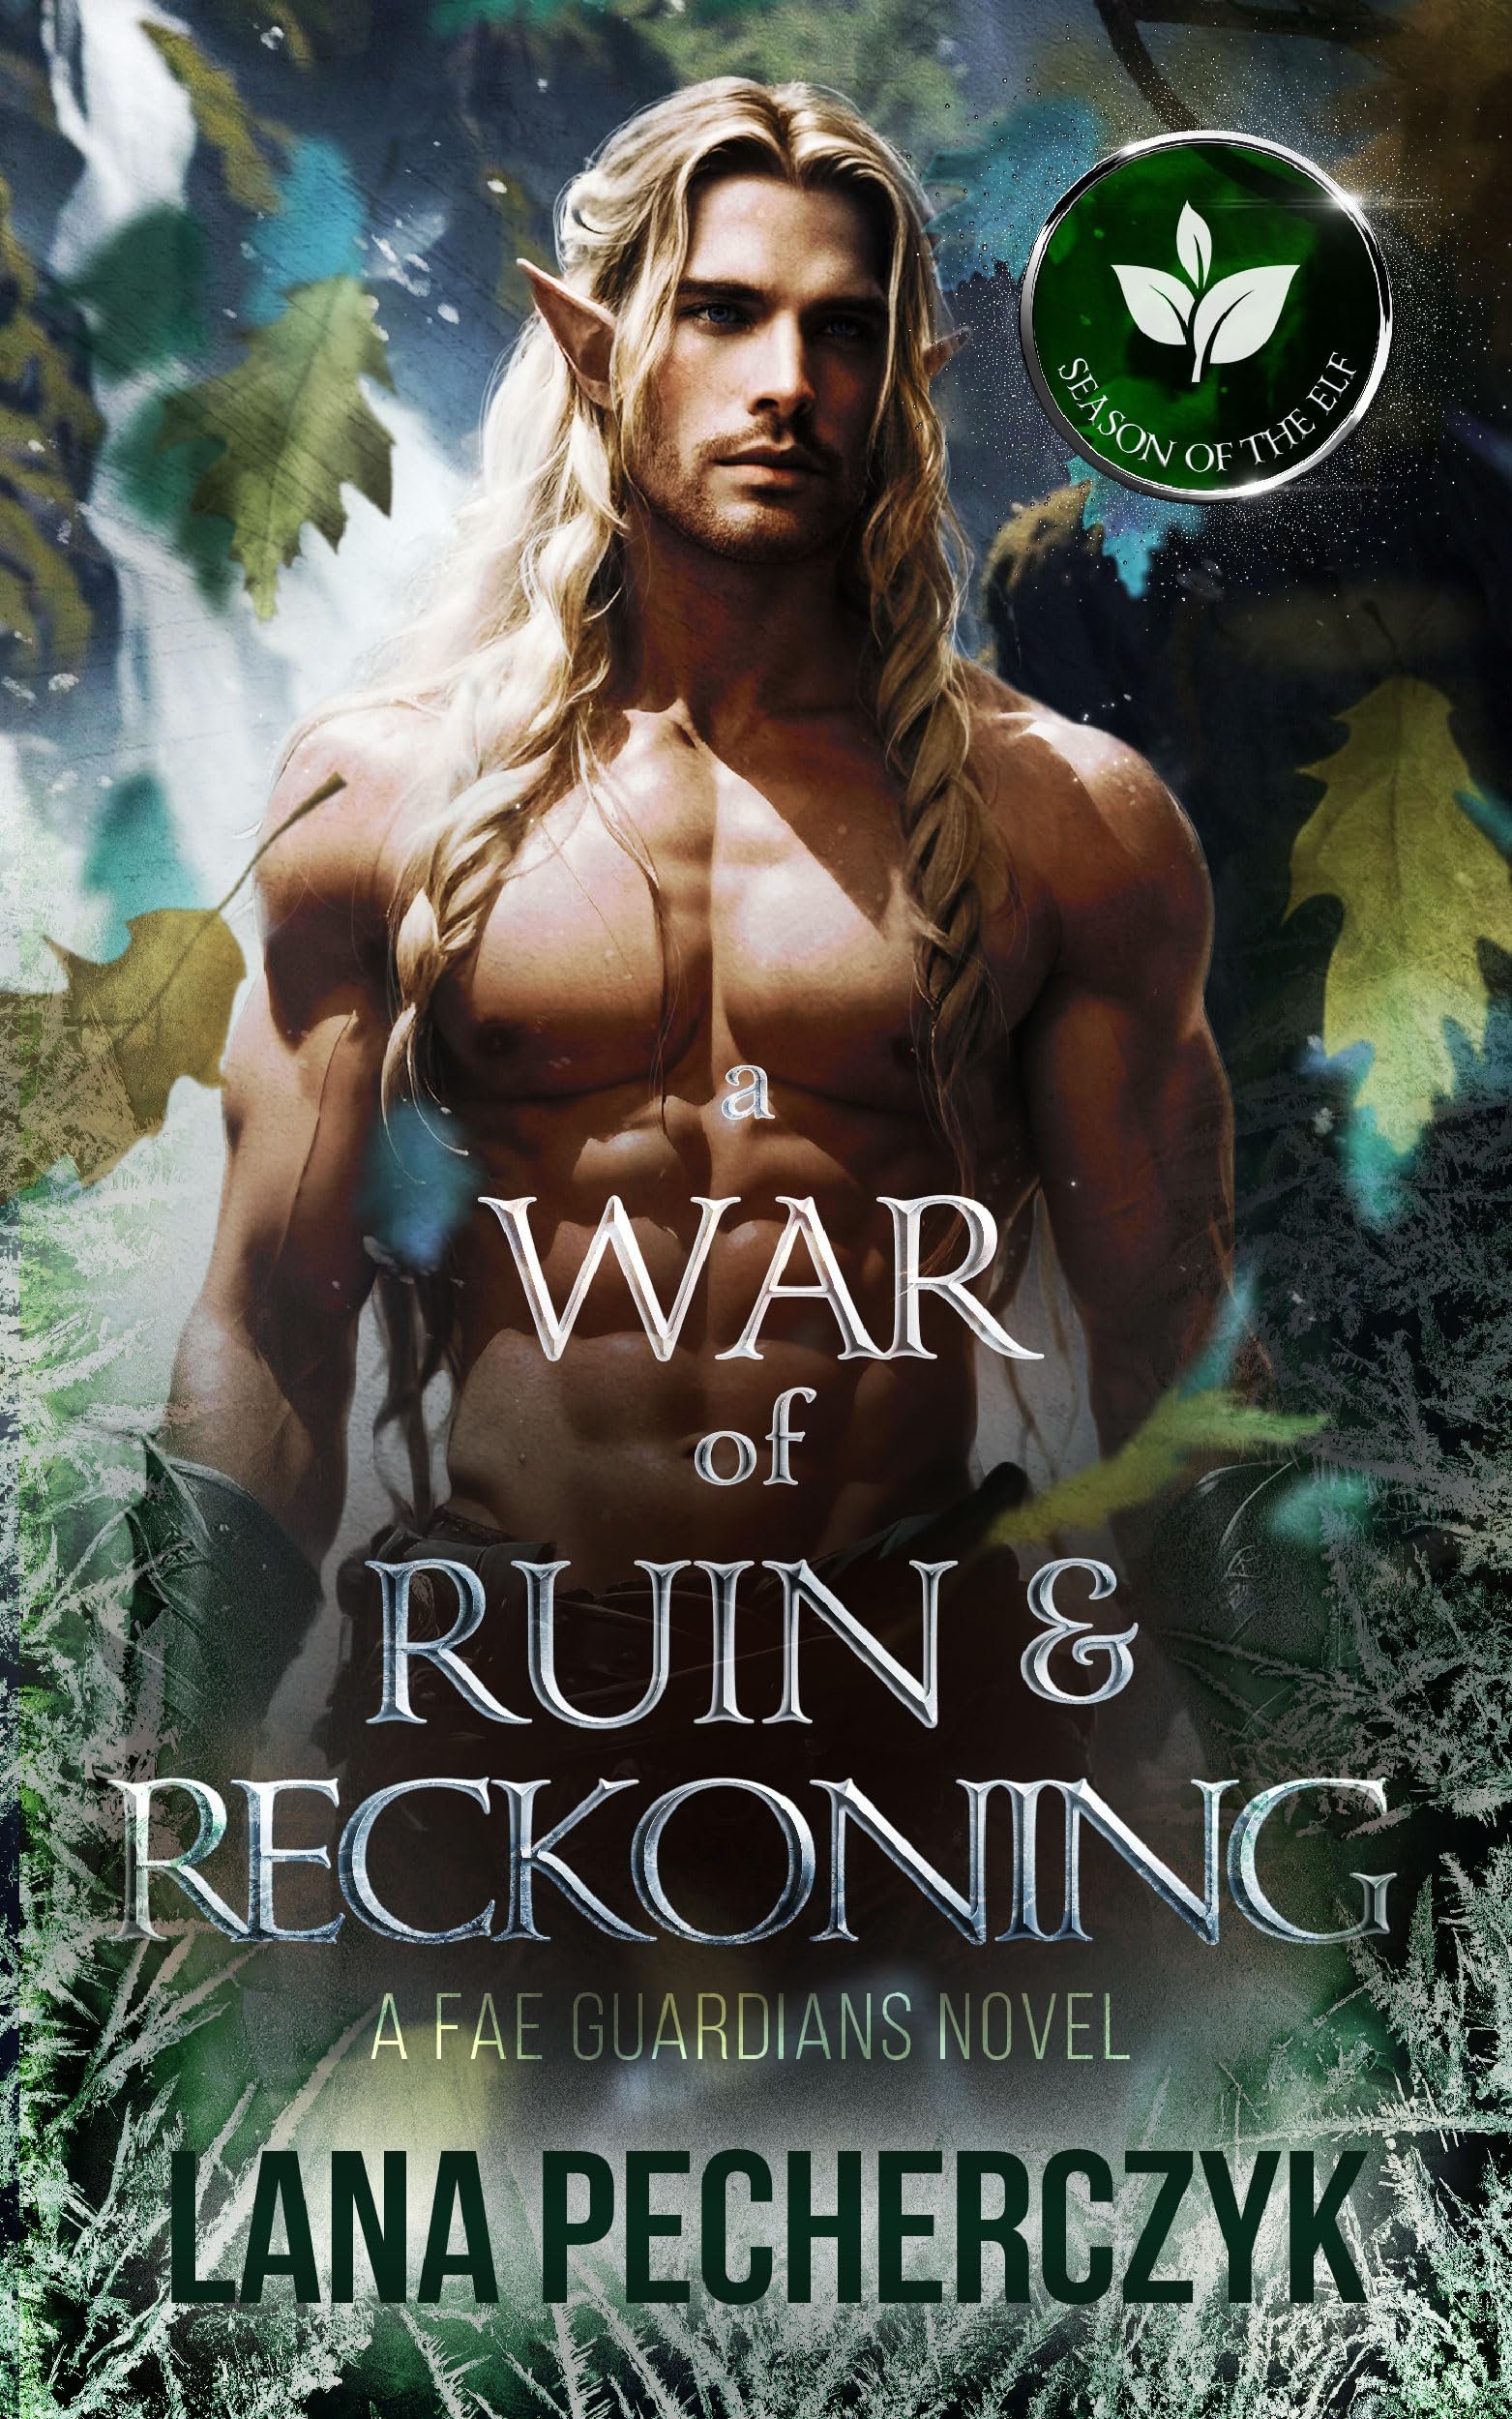 A War of Ruin and Reckoning: Season of the Elf (Fae Guardians Book 9) Cover